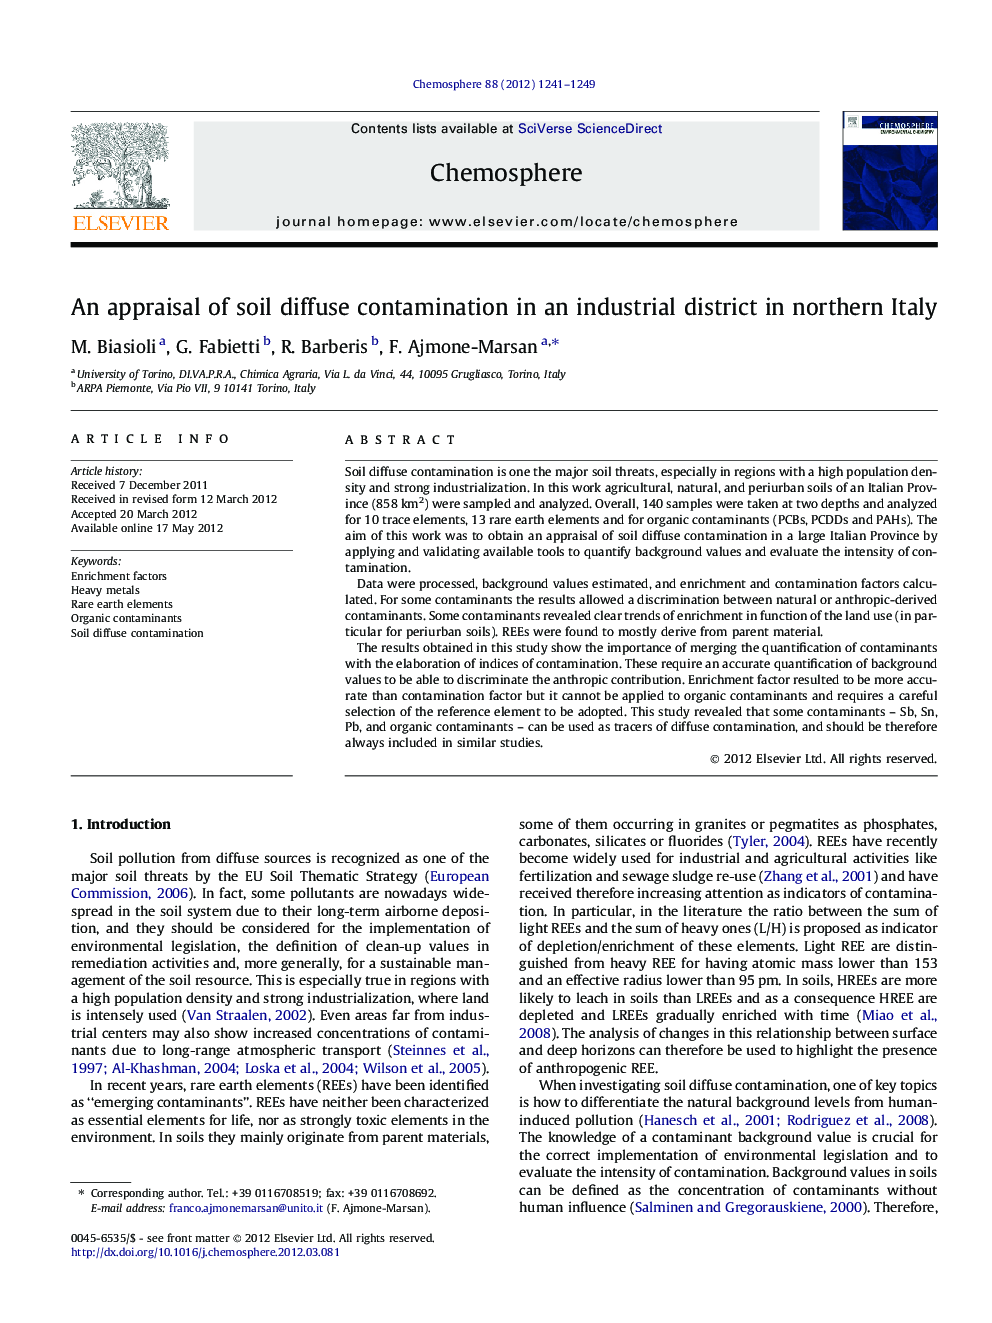 An appraisal of soil diffuse contamination in an industrial district in northern Italy